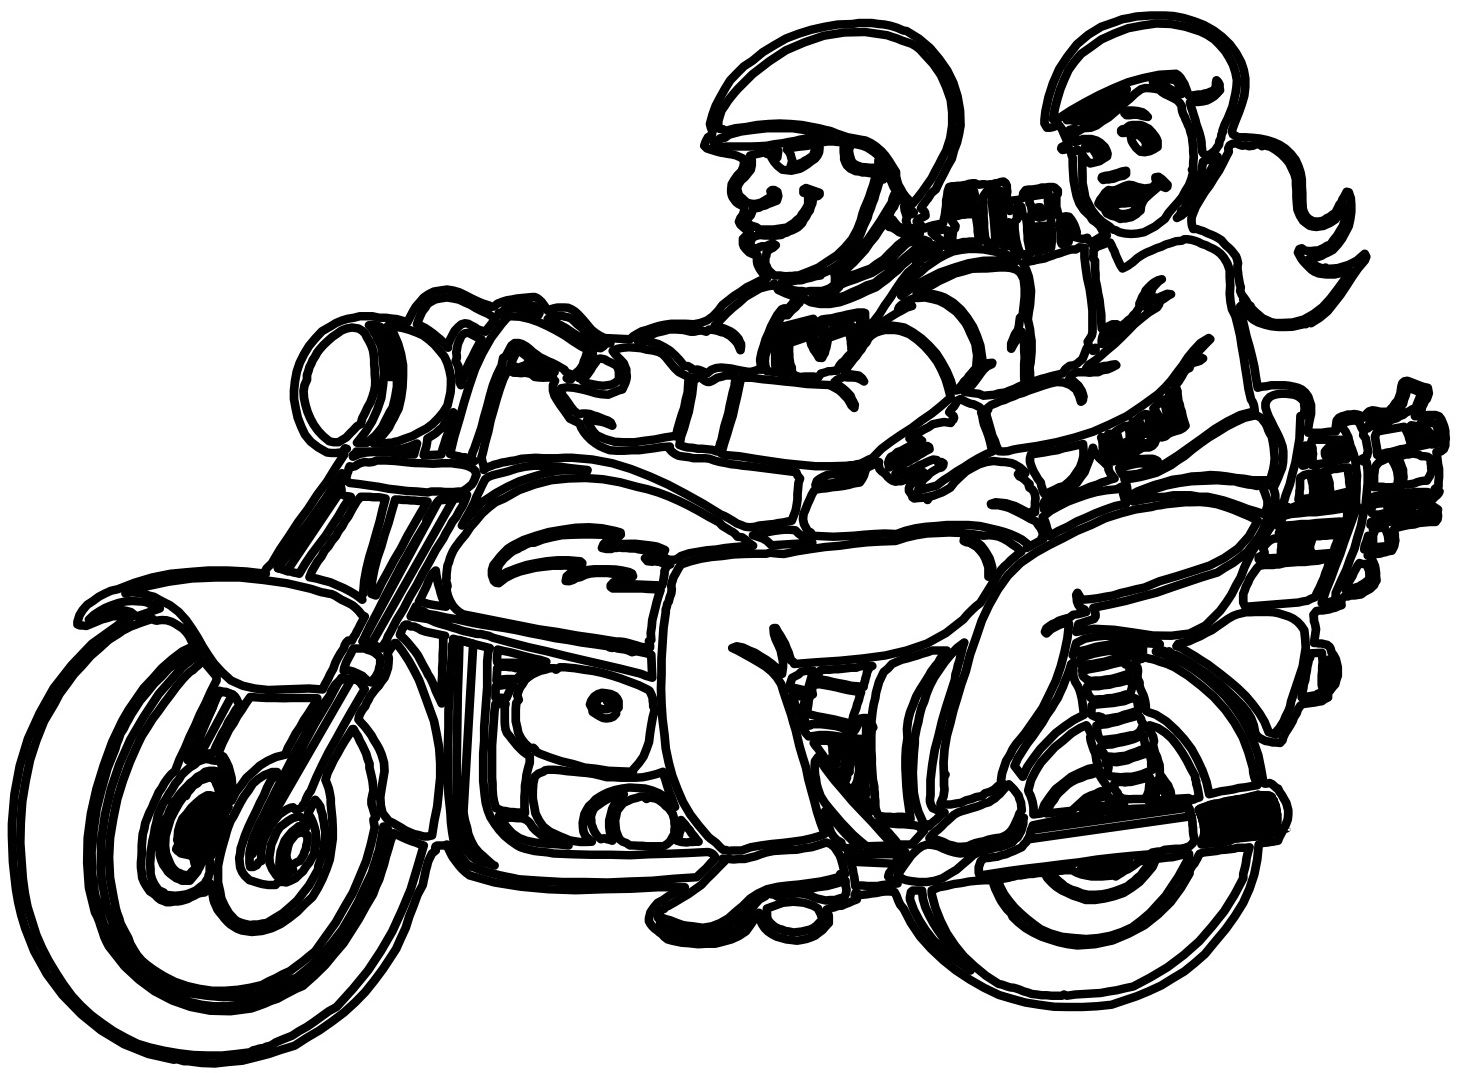 Motorcycle Line Drawing - ClipArt Best